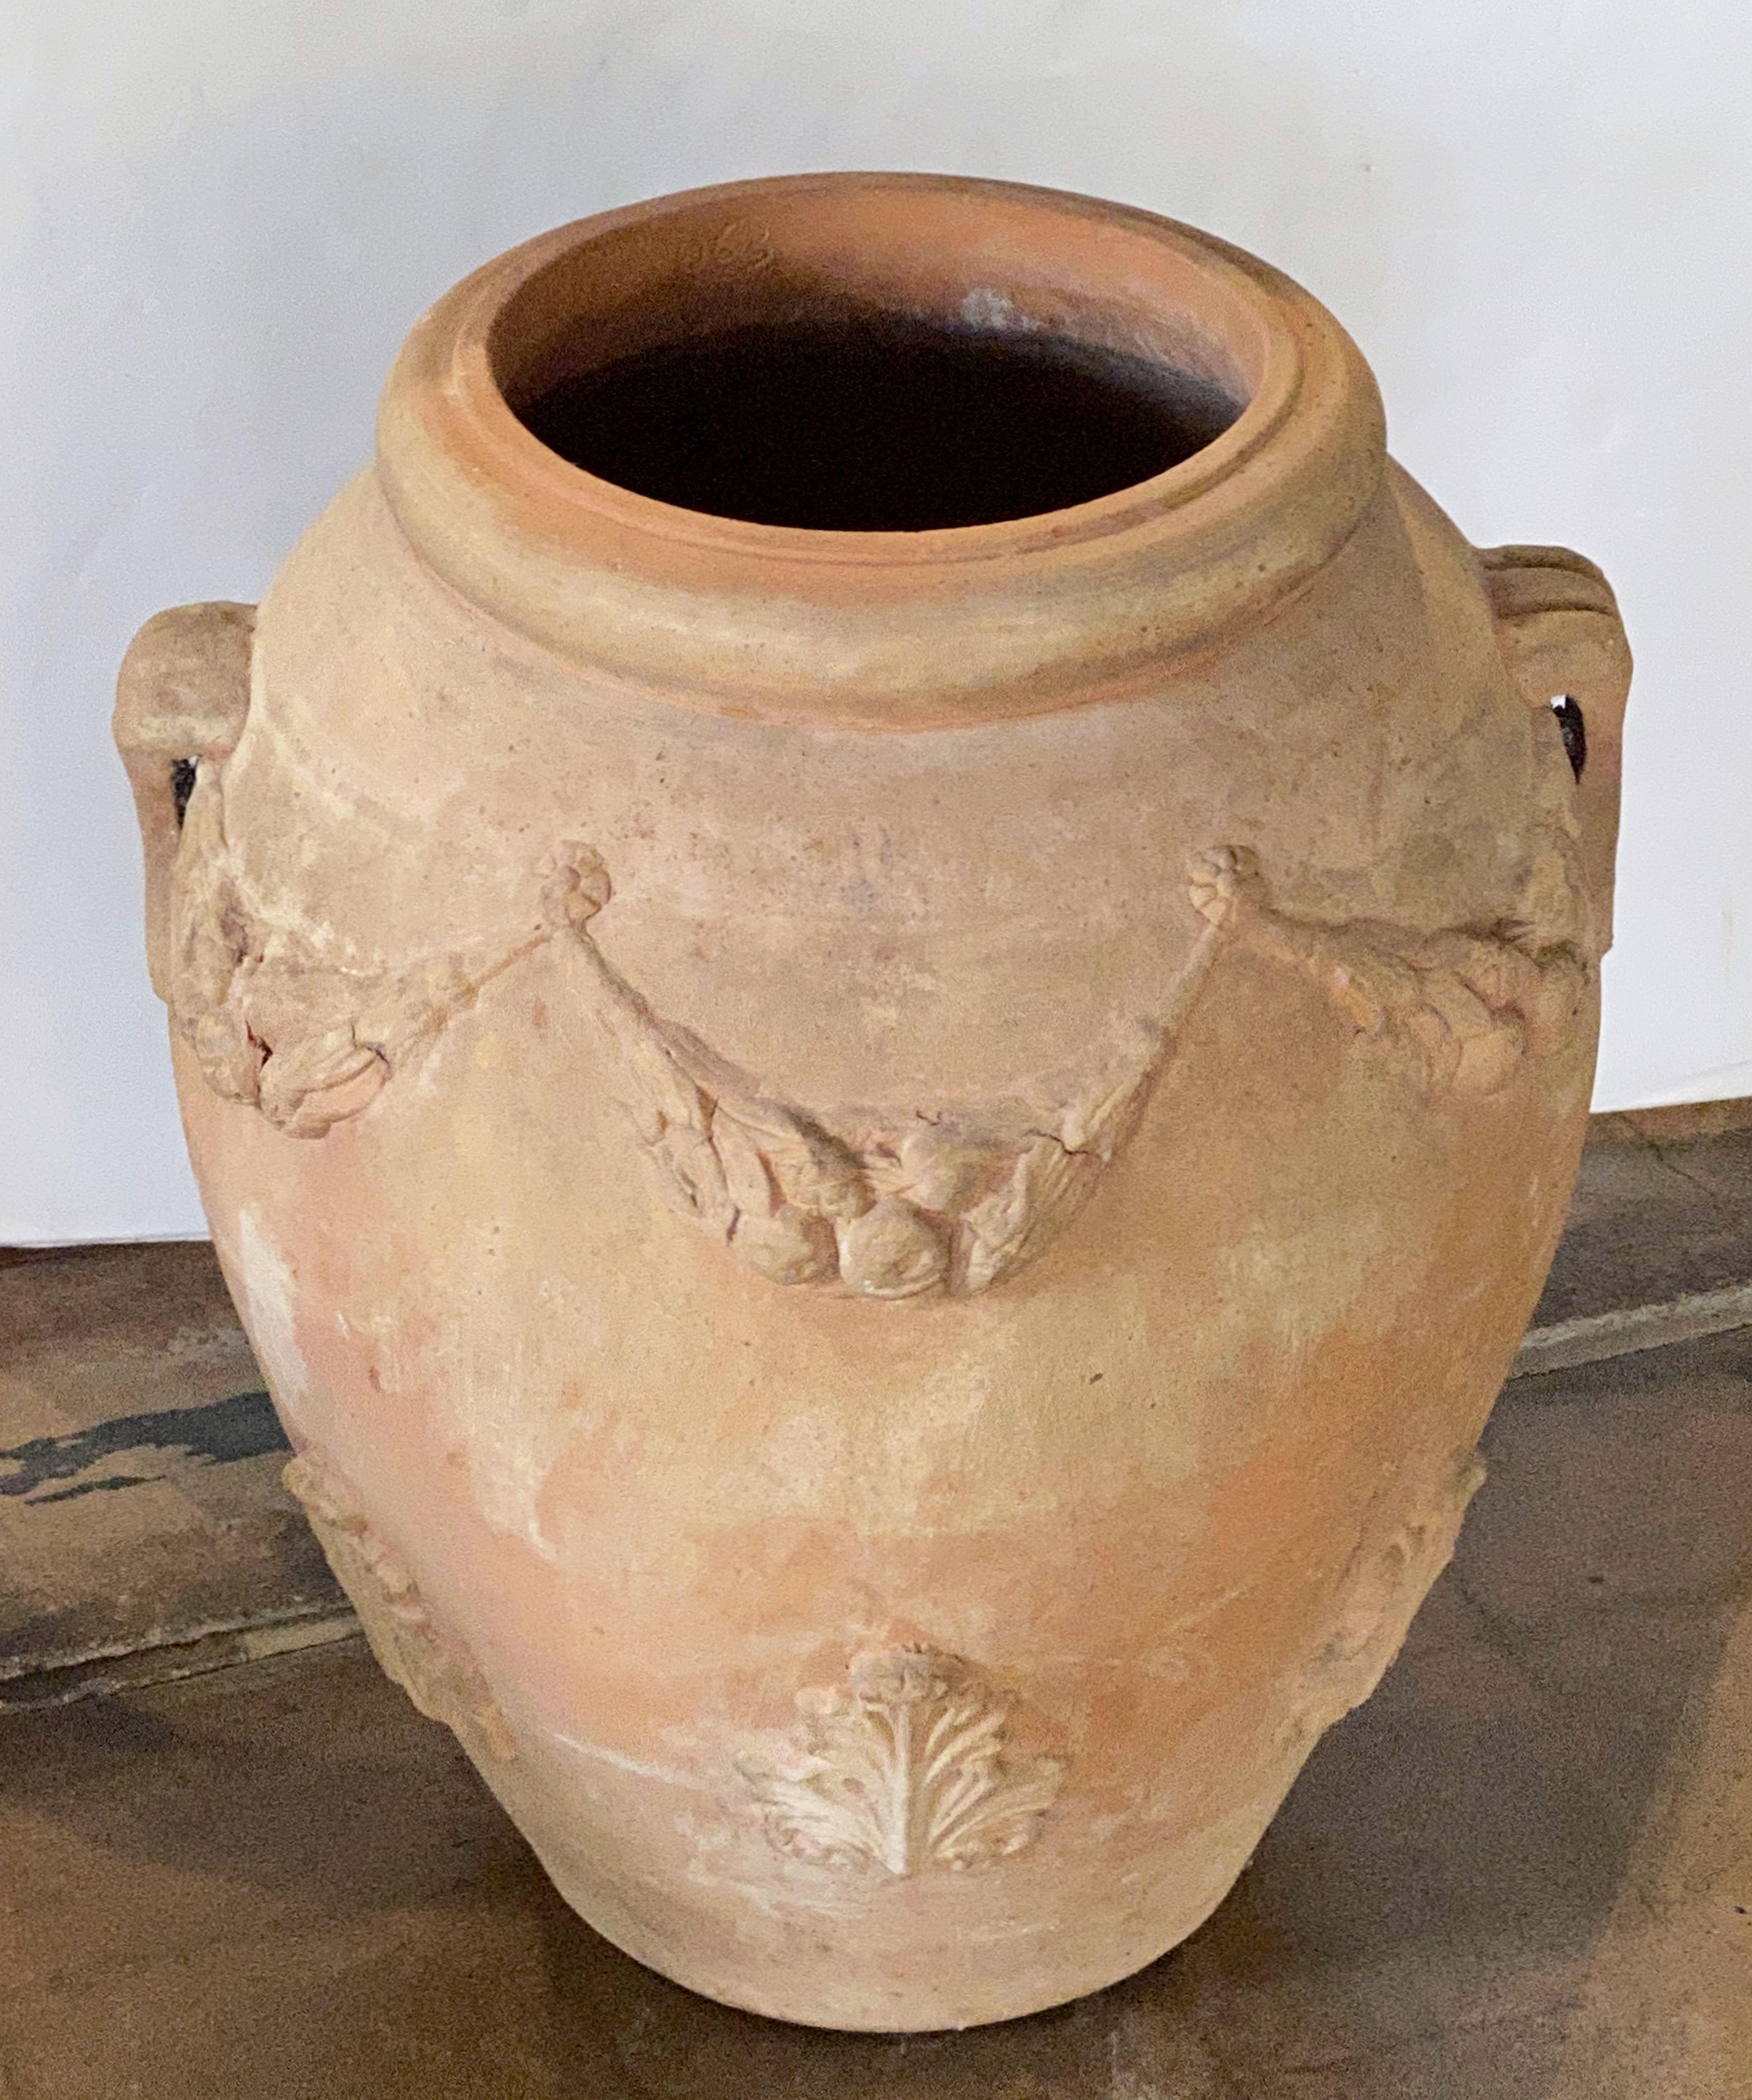 A handsome French garden pot or oil jar of terracotta earthenware pottery, featuring a rolled edge top over an ovoid body with opposing handles and decorative high-relief garlands and acanthus leaves around the circumference.

Perfect for display